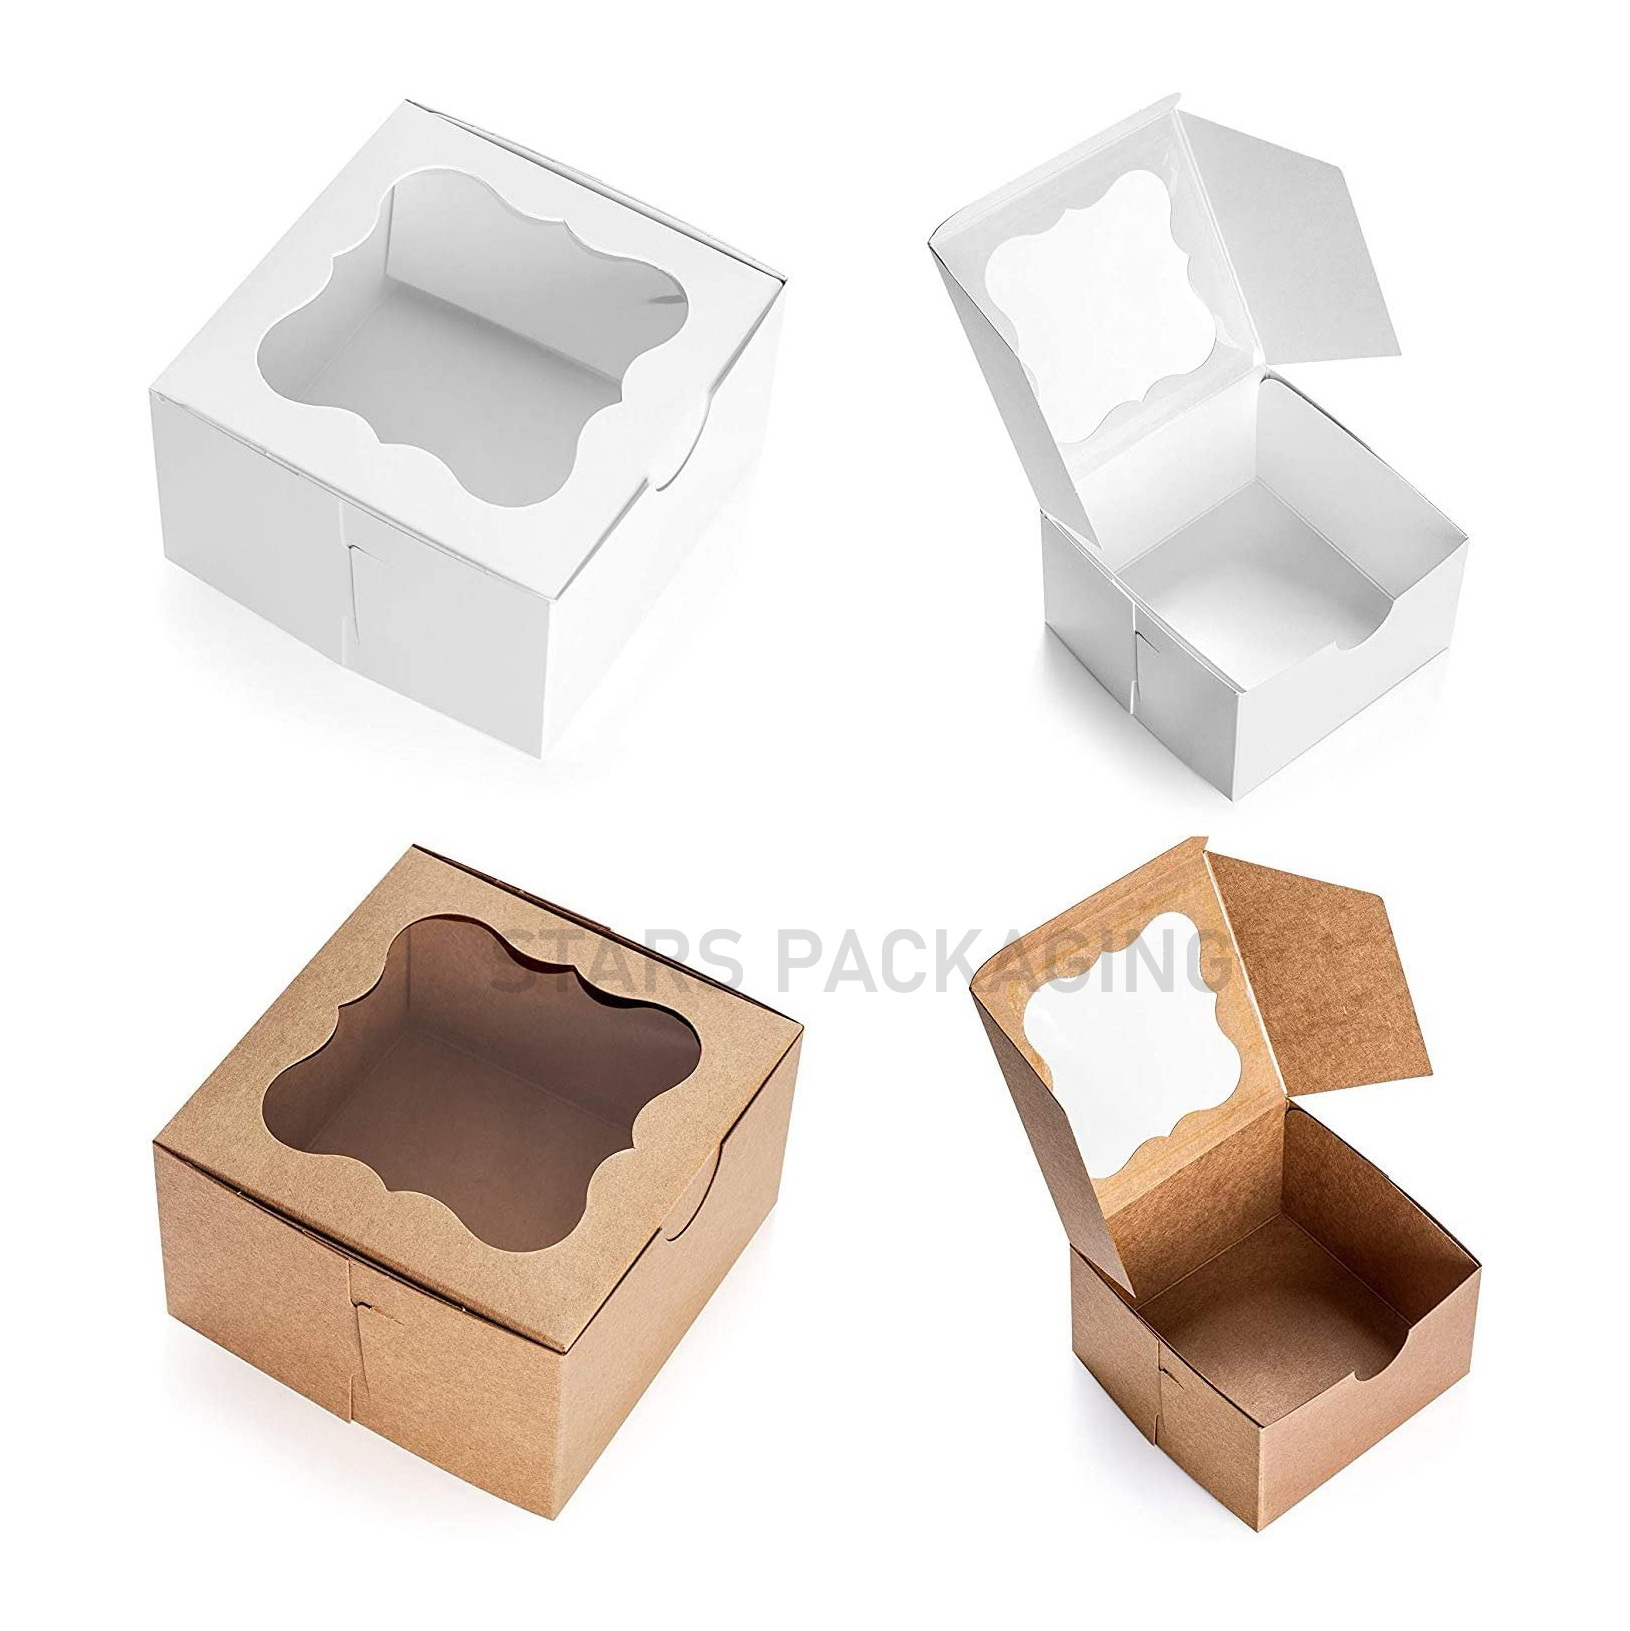 Custom Printed Bakery Packaging Pastry Boxes for Cookies, Cakes, Cupcakes, Donuts, Bread, Macarons